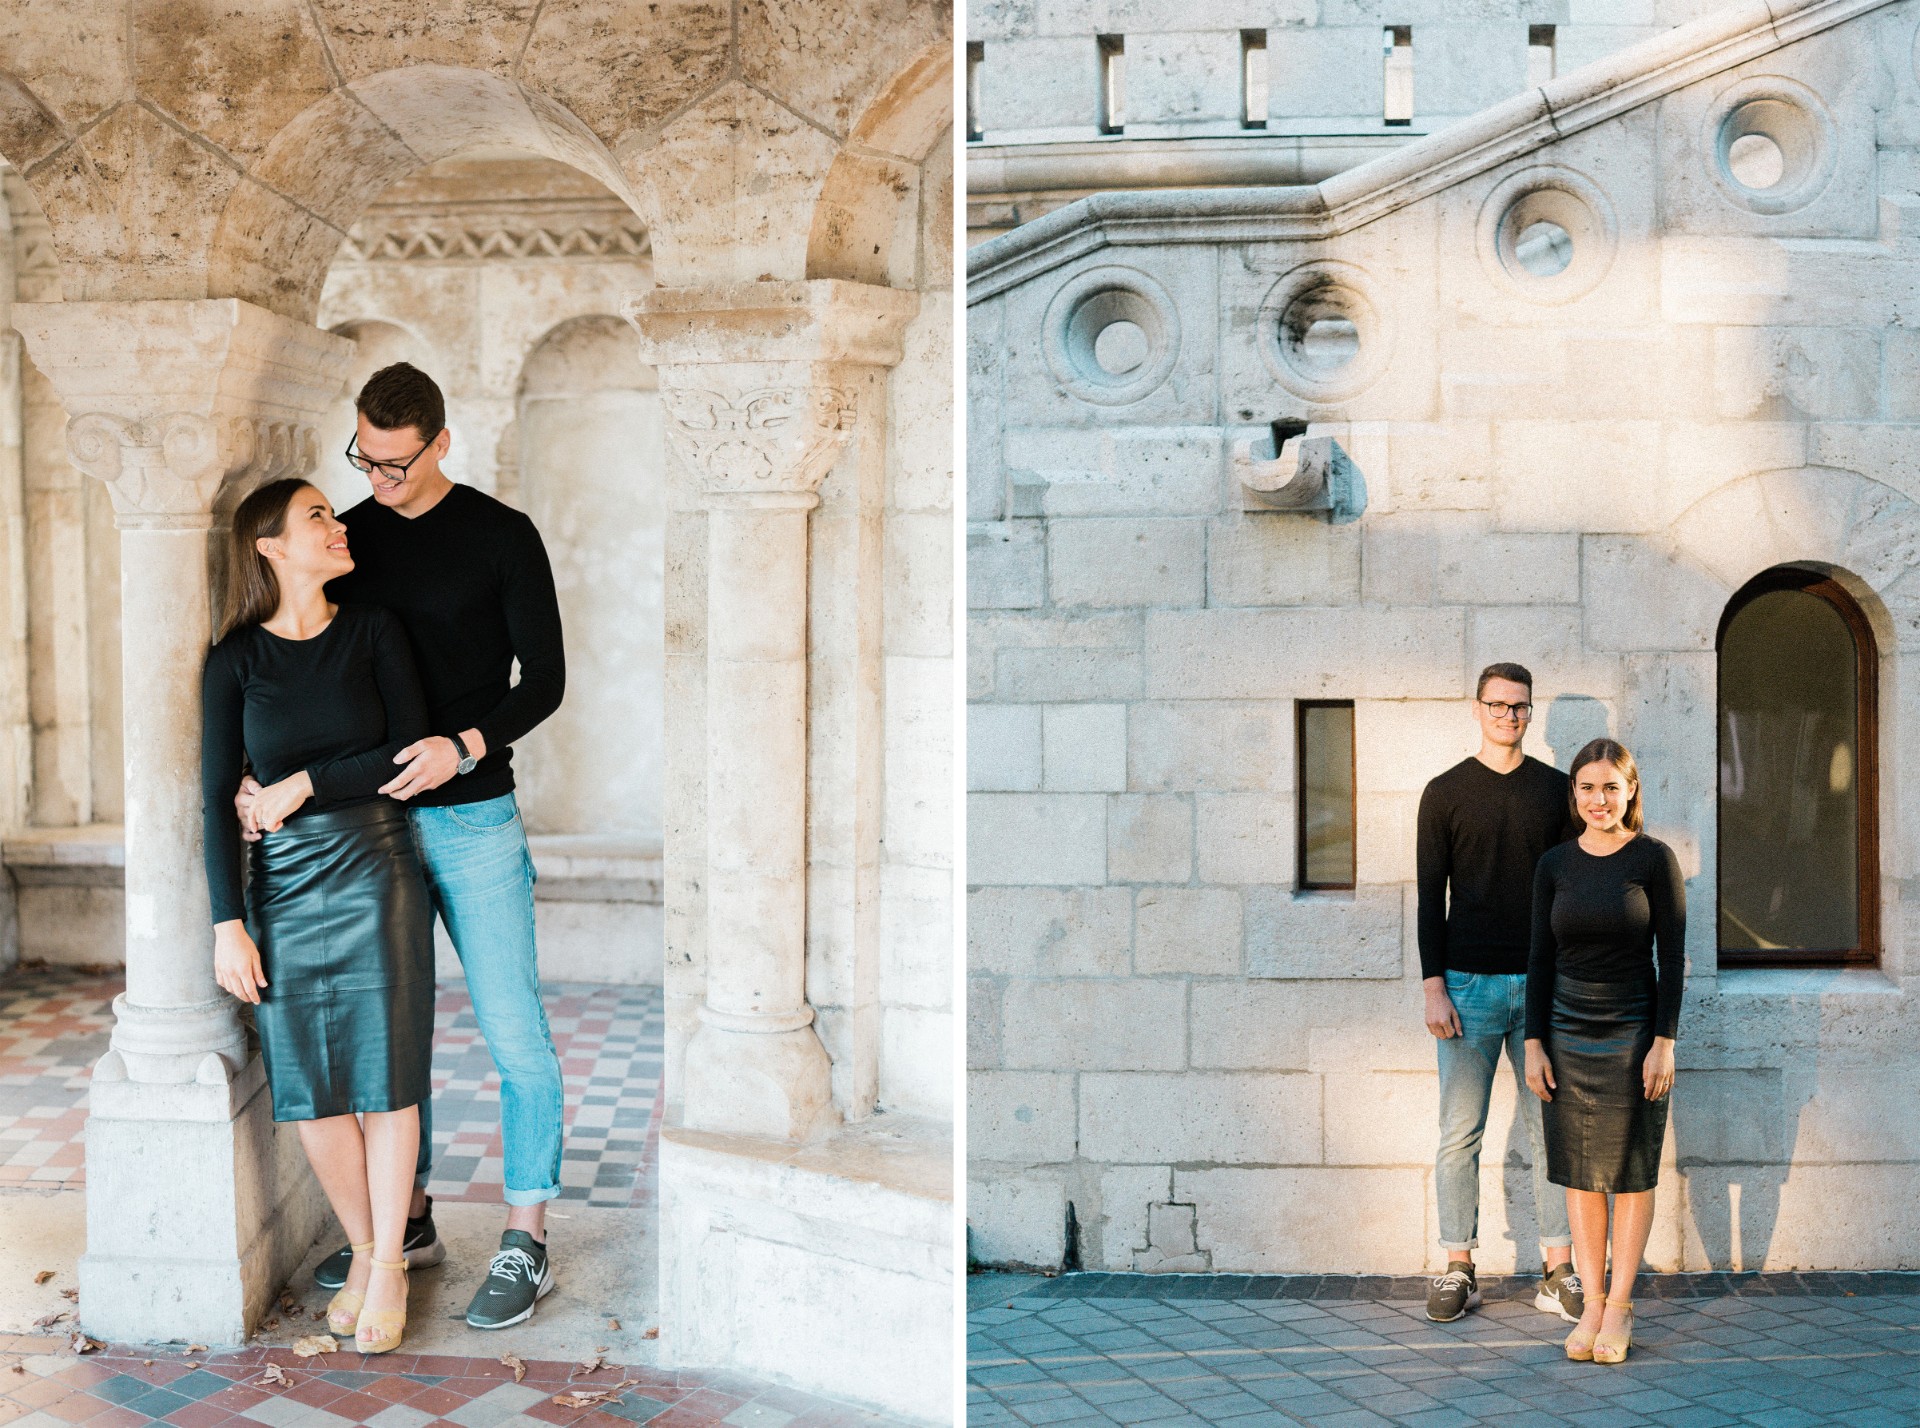 budapest special engagement session wow so beautiful.jpg